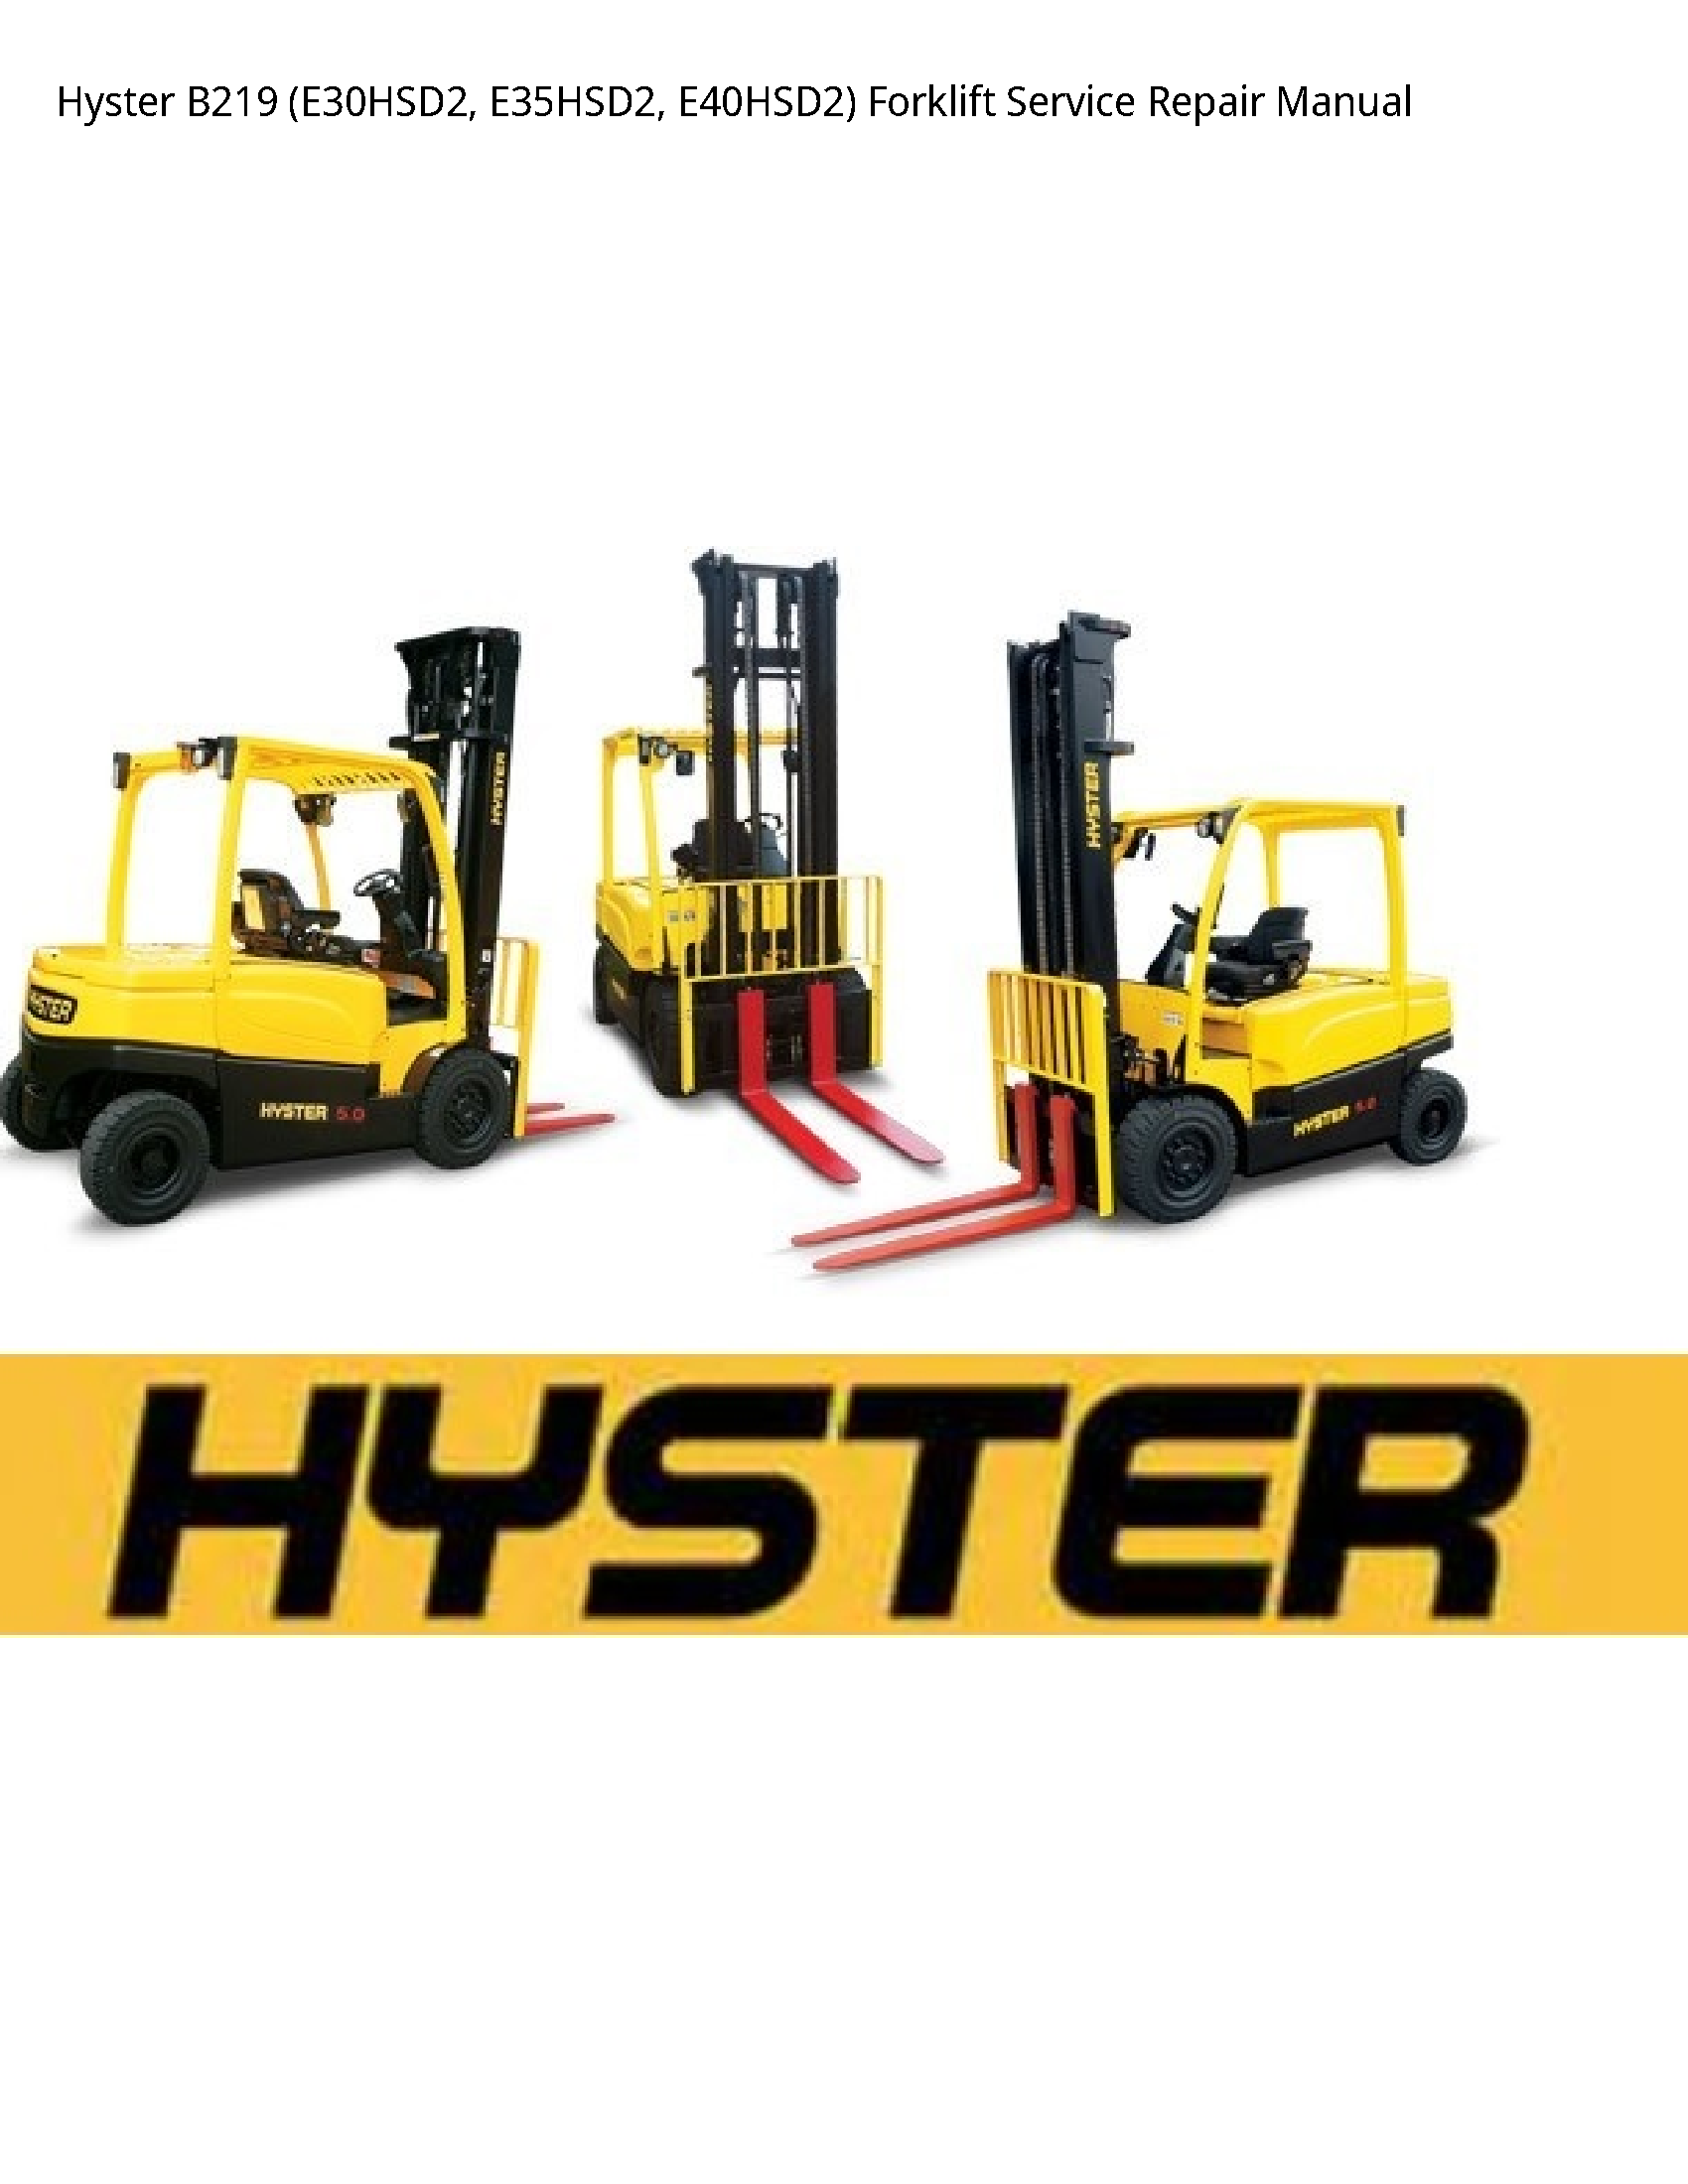 Hyster B219 Forklift manual